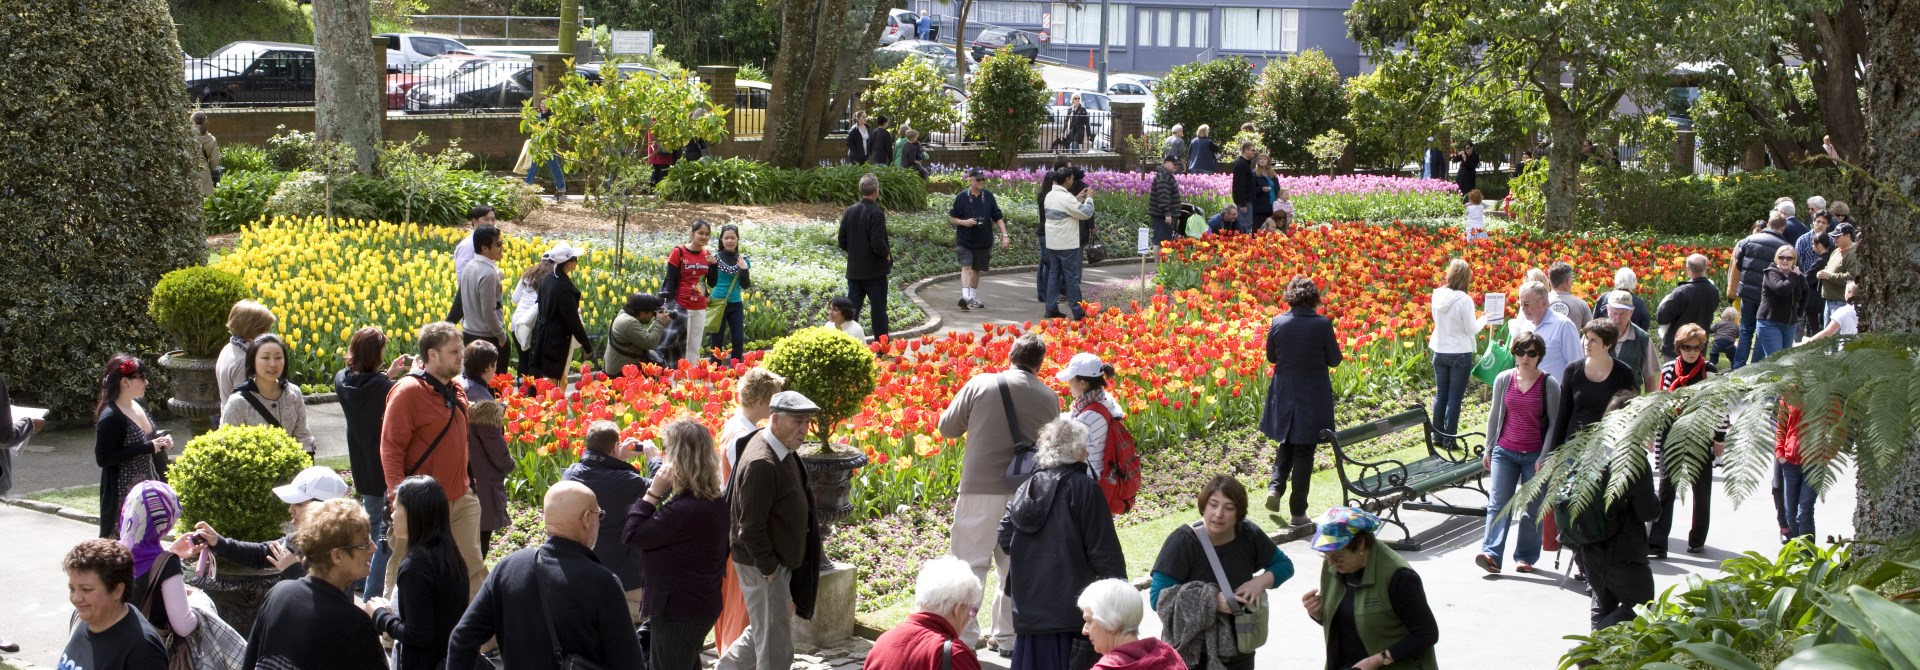 A view of the Wellington Botanic Garden seasonal flower beds, busy with people coverings the paths and trees around the edges.